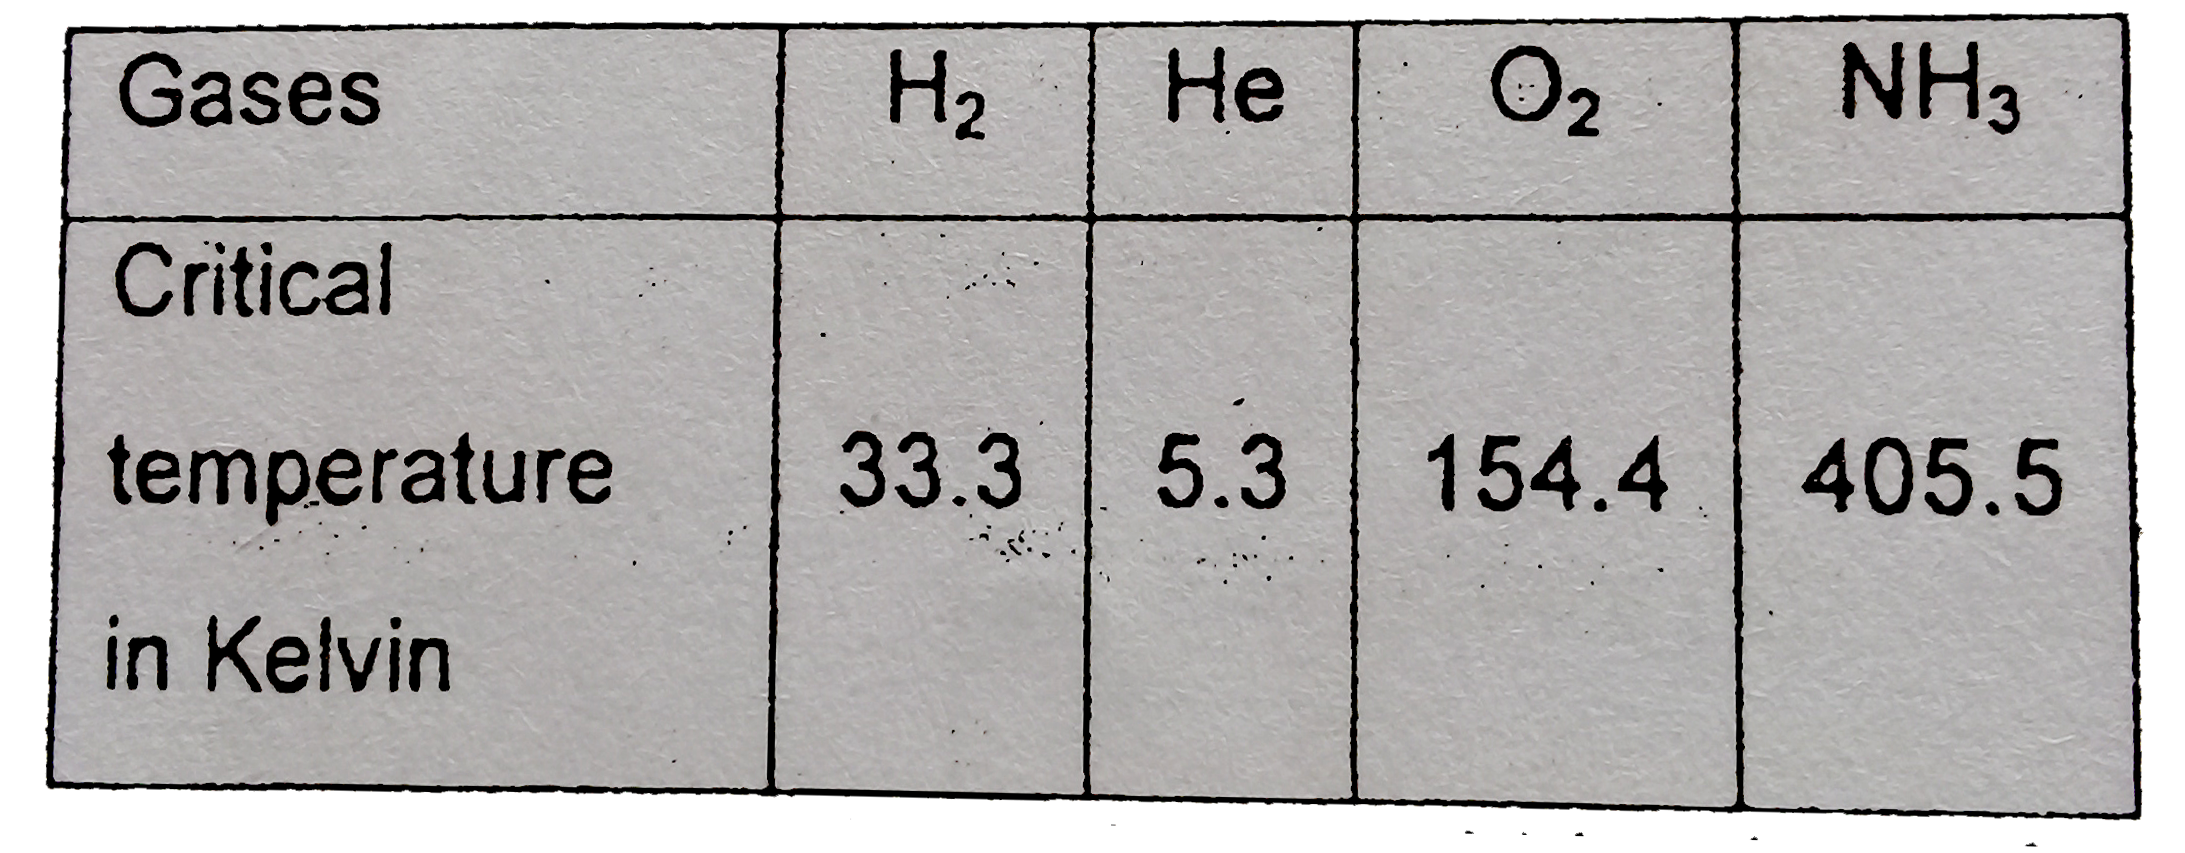 Gases possess characteristic critical temperature which depends upon the magnitude of intermolecular forces between the particles. Following are the critical tempeatures of some gases. From the above data what would be the order of liquefaction of these gases? Start writing the order from the gas liquefying first.